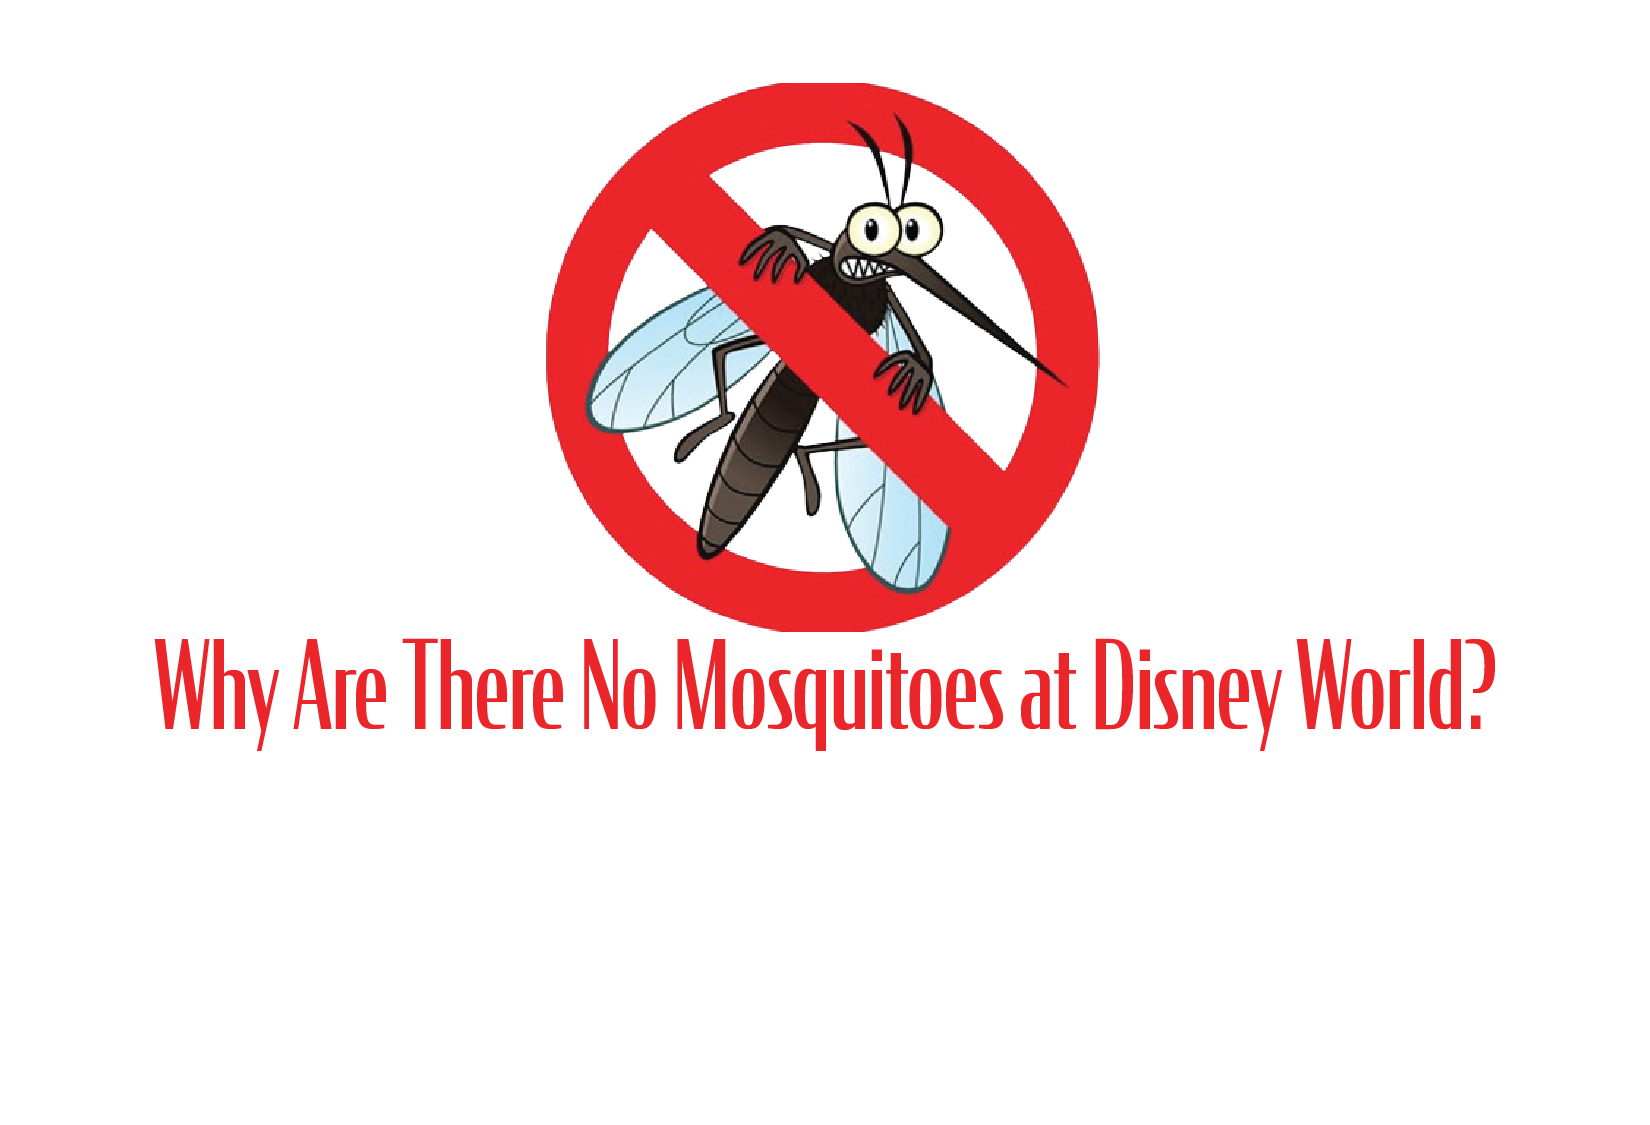 Why Are There No Mosquitoes at Disney World?